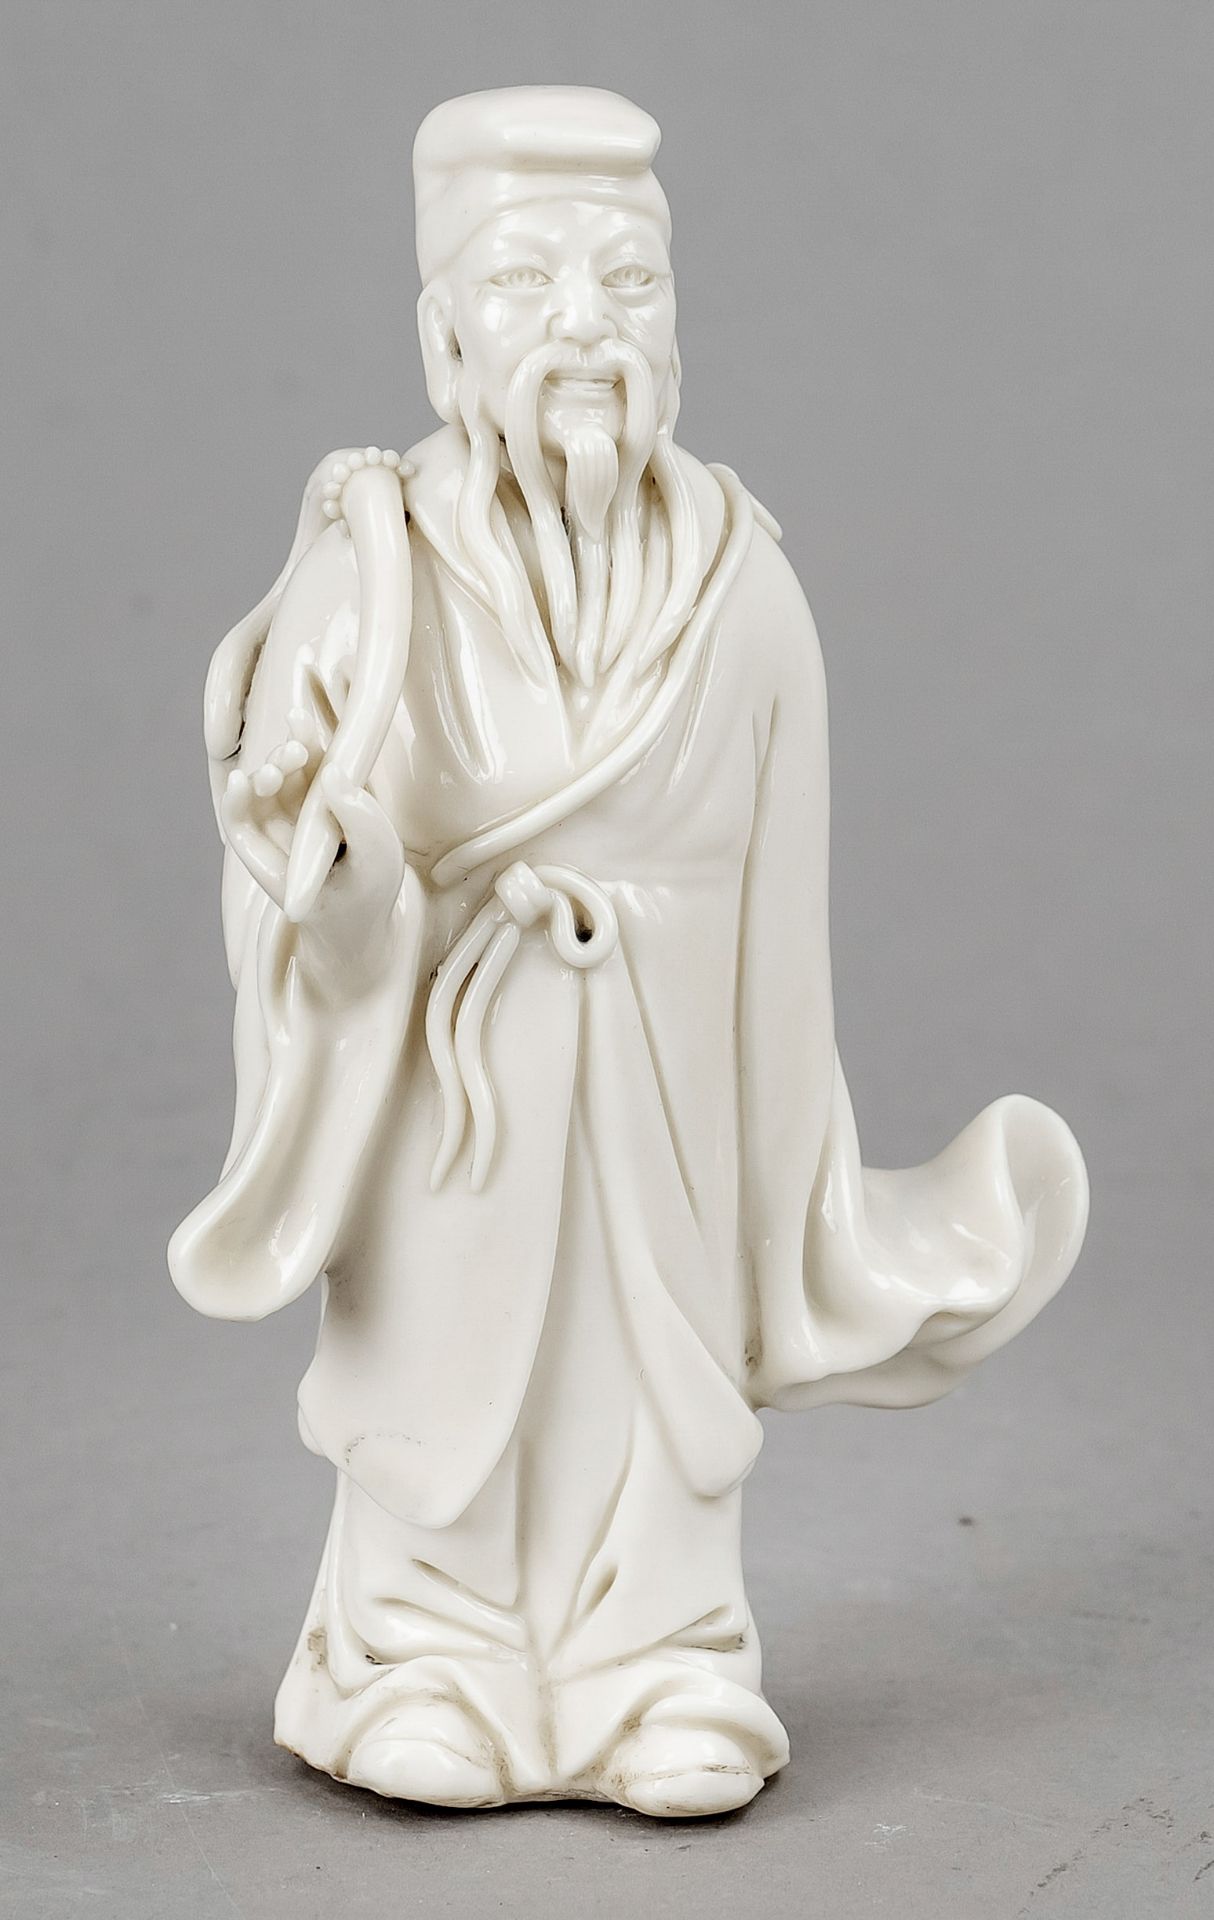 Immortal Lü Dongbin Blanc de Chine, China, 19th/20th century, Dehua porcelain of one of the 8